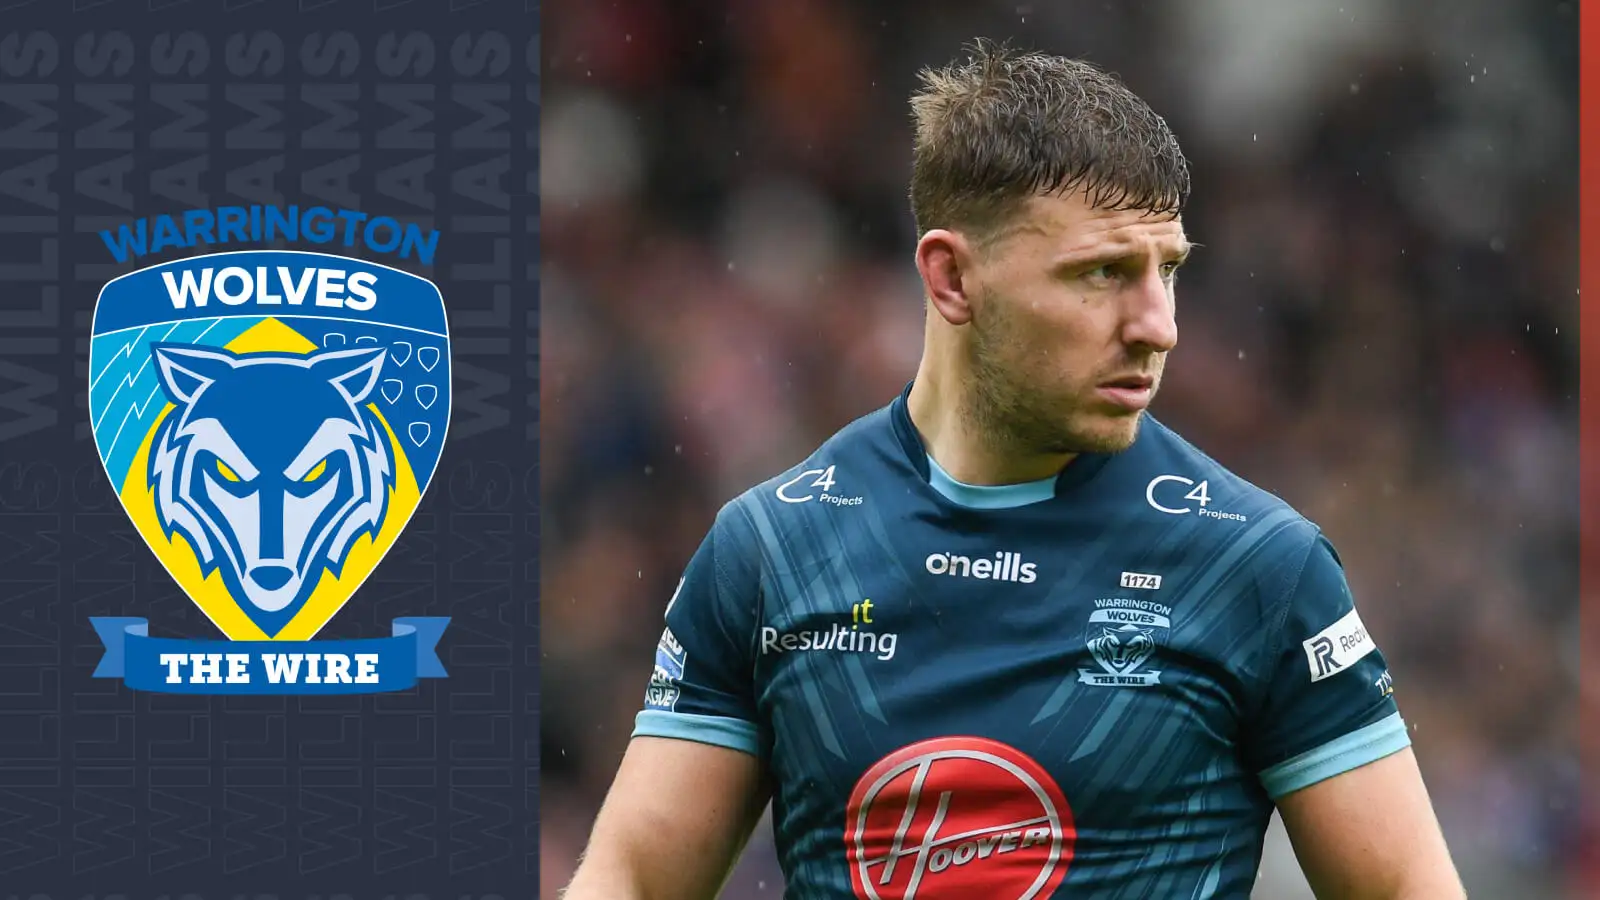 Warrington Wolves: George Williams reaffirms desire to win Grand Final, discusses ‘finding an identity’ & importance of closing gap at top